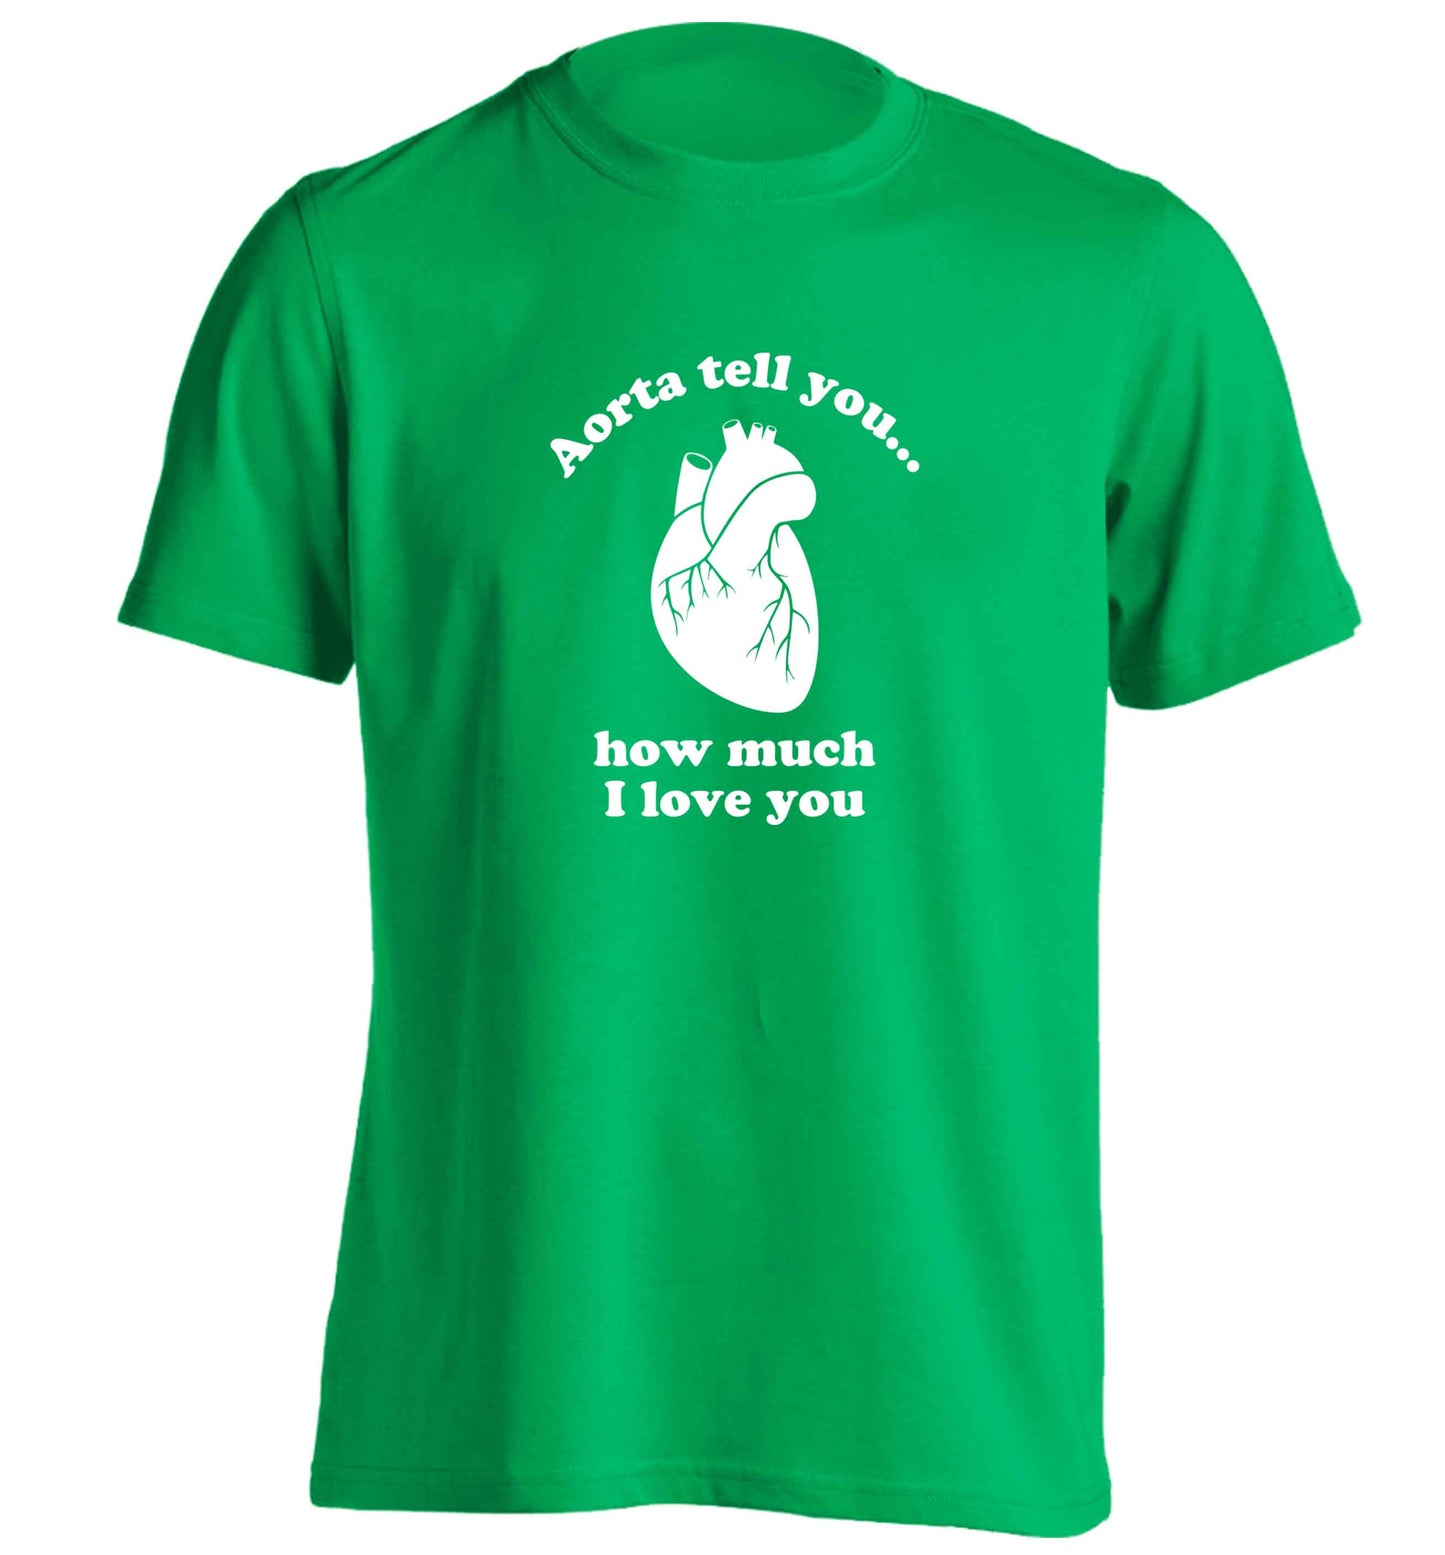 Aorta tell you how much I love you adults unisex green Tshirt 2XL